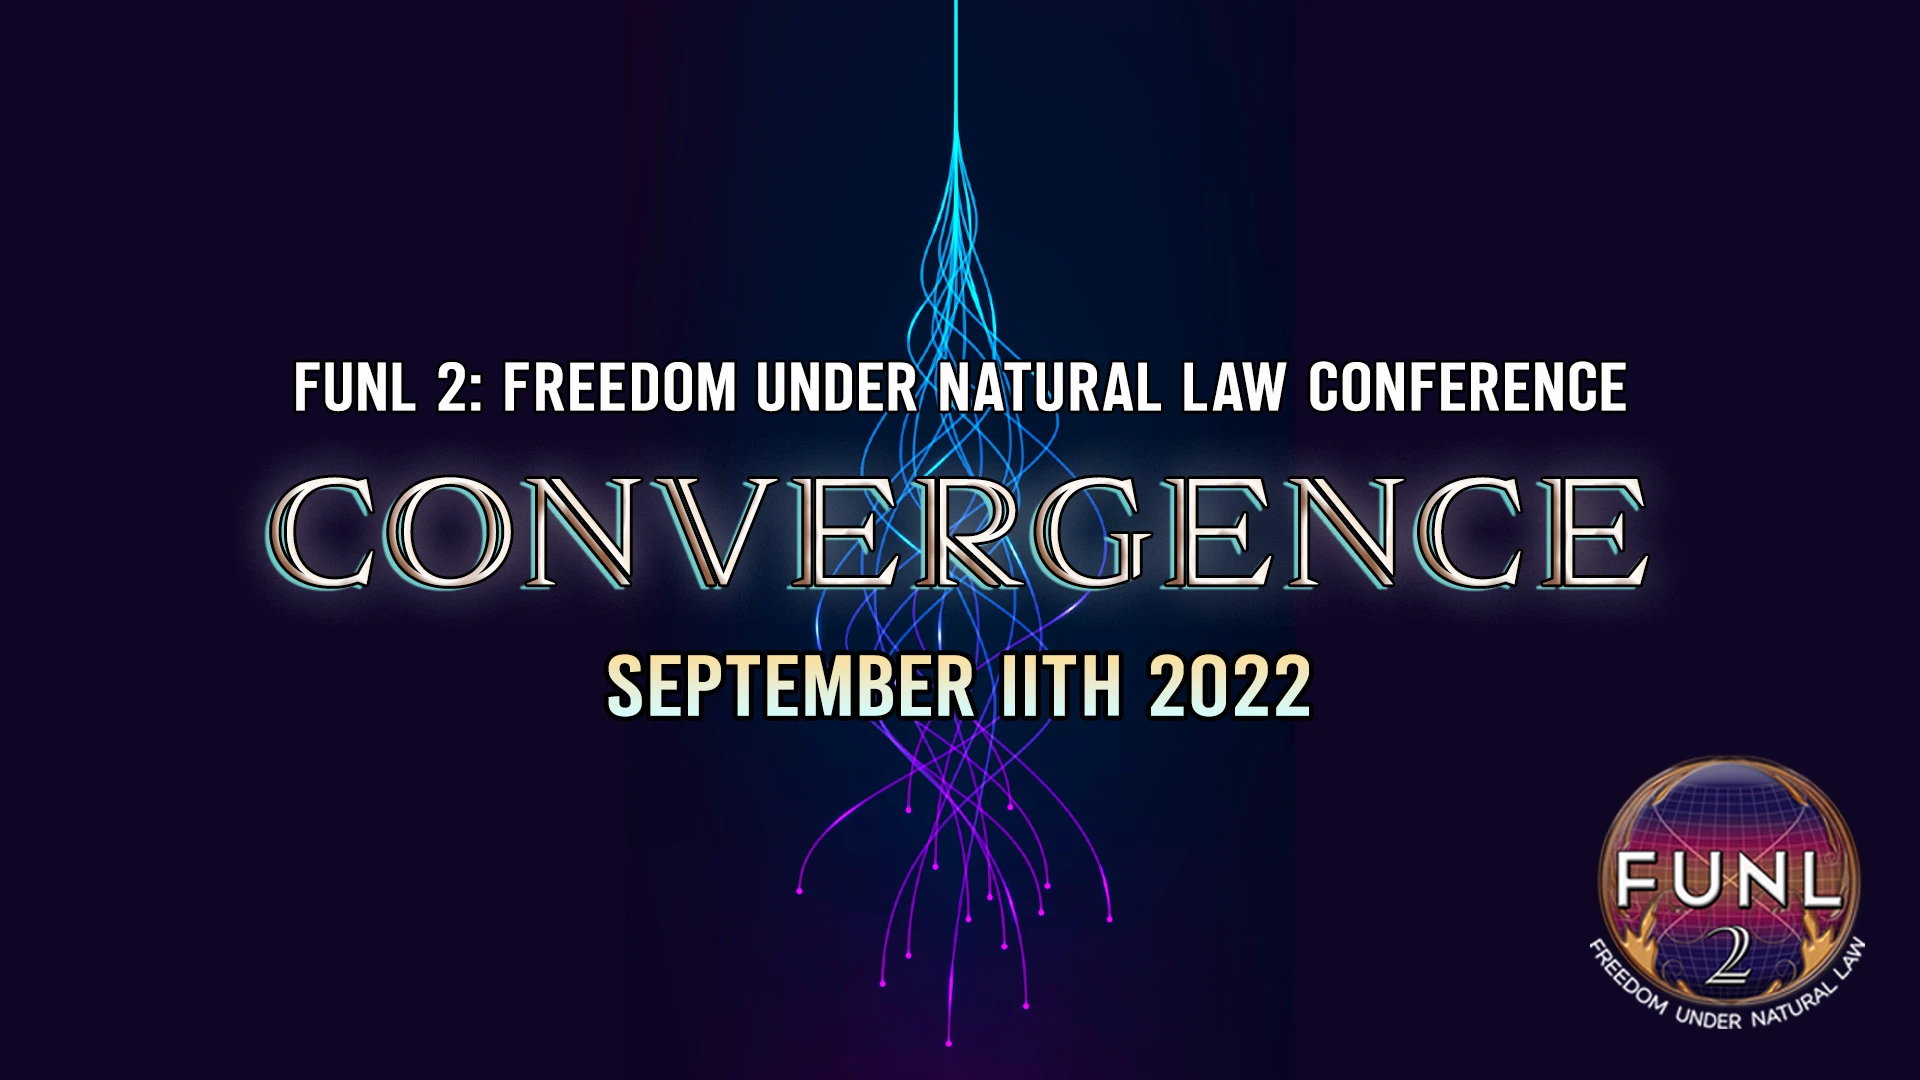 Freedom Under Natural Law - FUNL2 - Day 2 - Sept 11, 2022